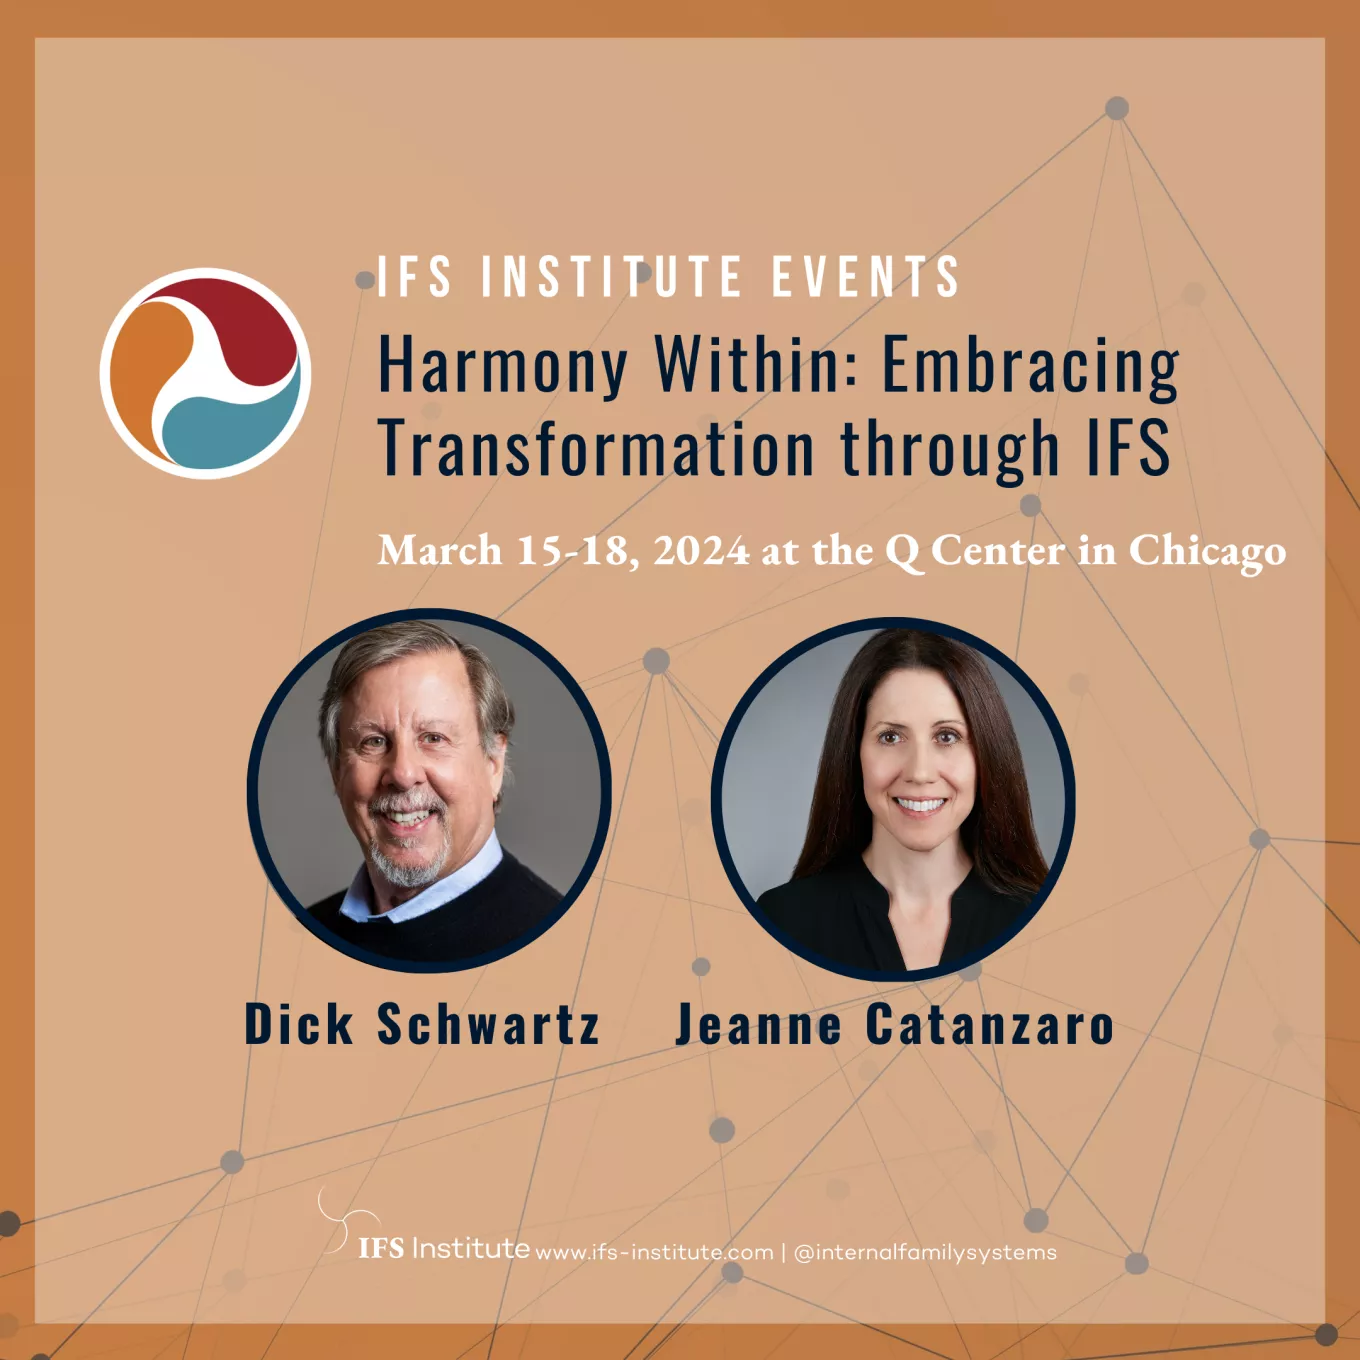 Orange square with IFS icon. Text says: IFS Institute Events, Harmony Within: Embracing transformation with IFS, March 15-18, 2024 at the Q Center in Chicago. Headshots of Dick Schwartz and Jean Catanzaro 